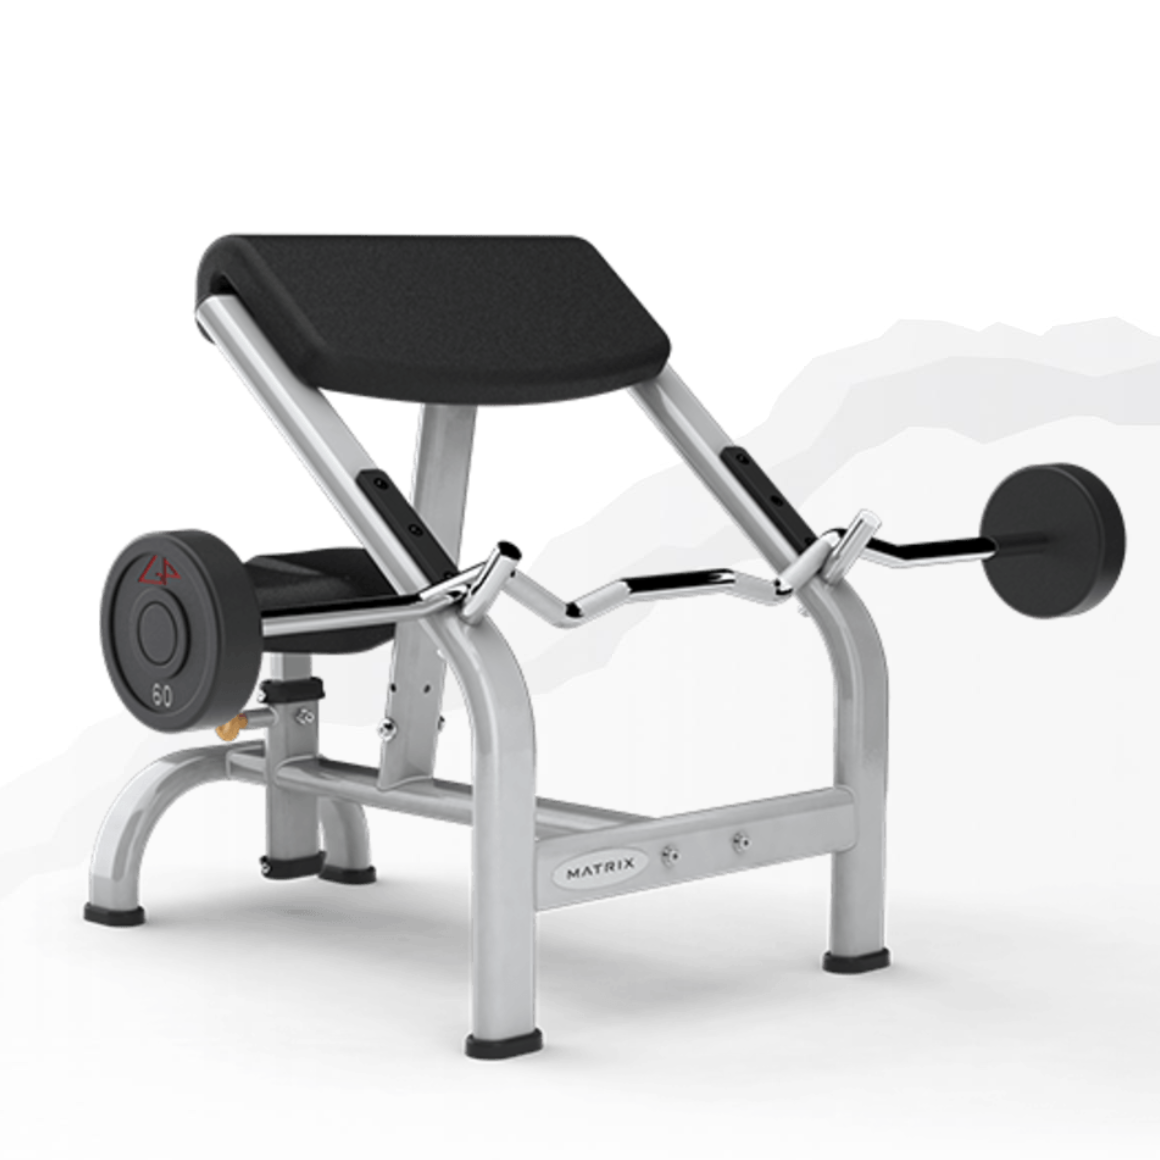 Used Matrix Preacher Curl Bench with Bar